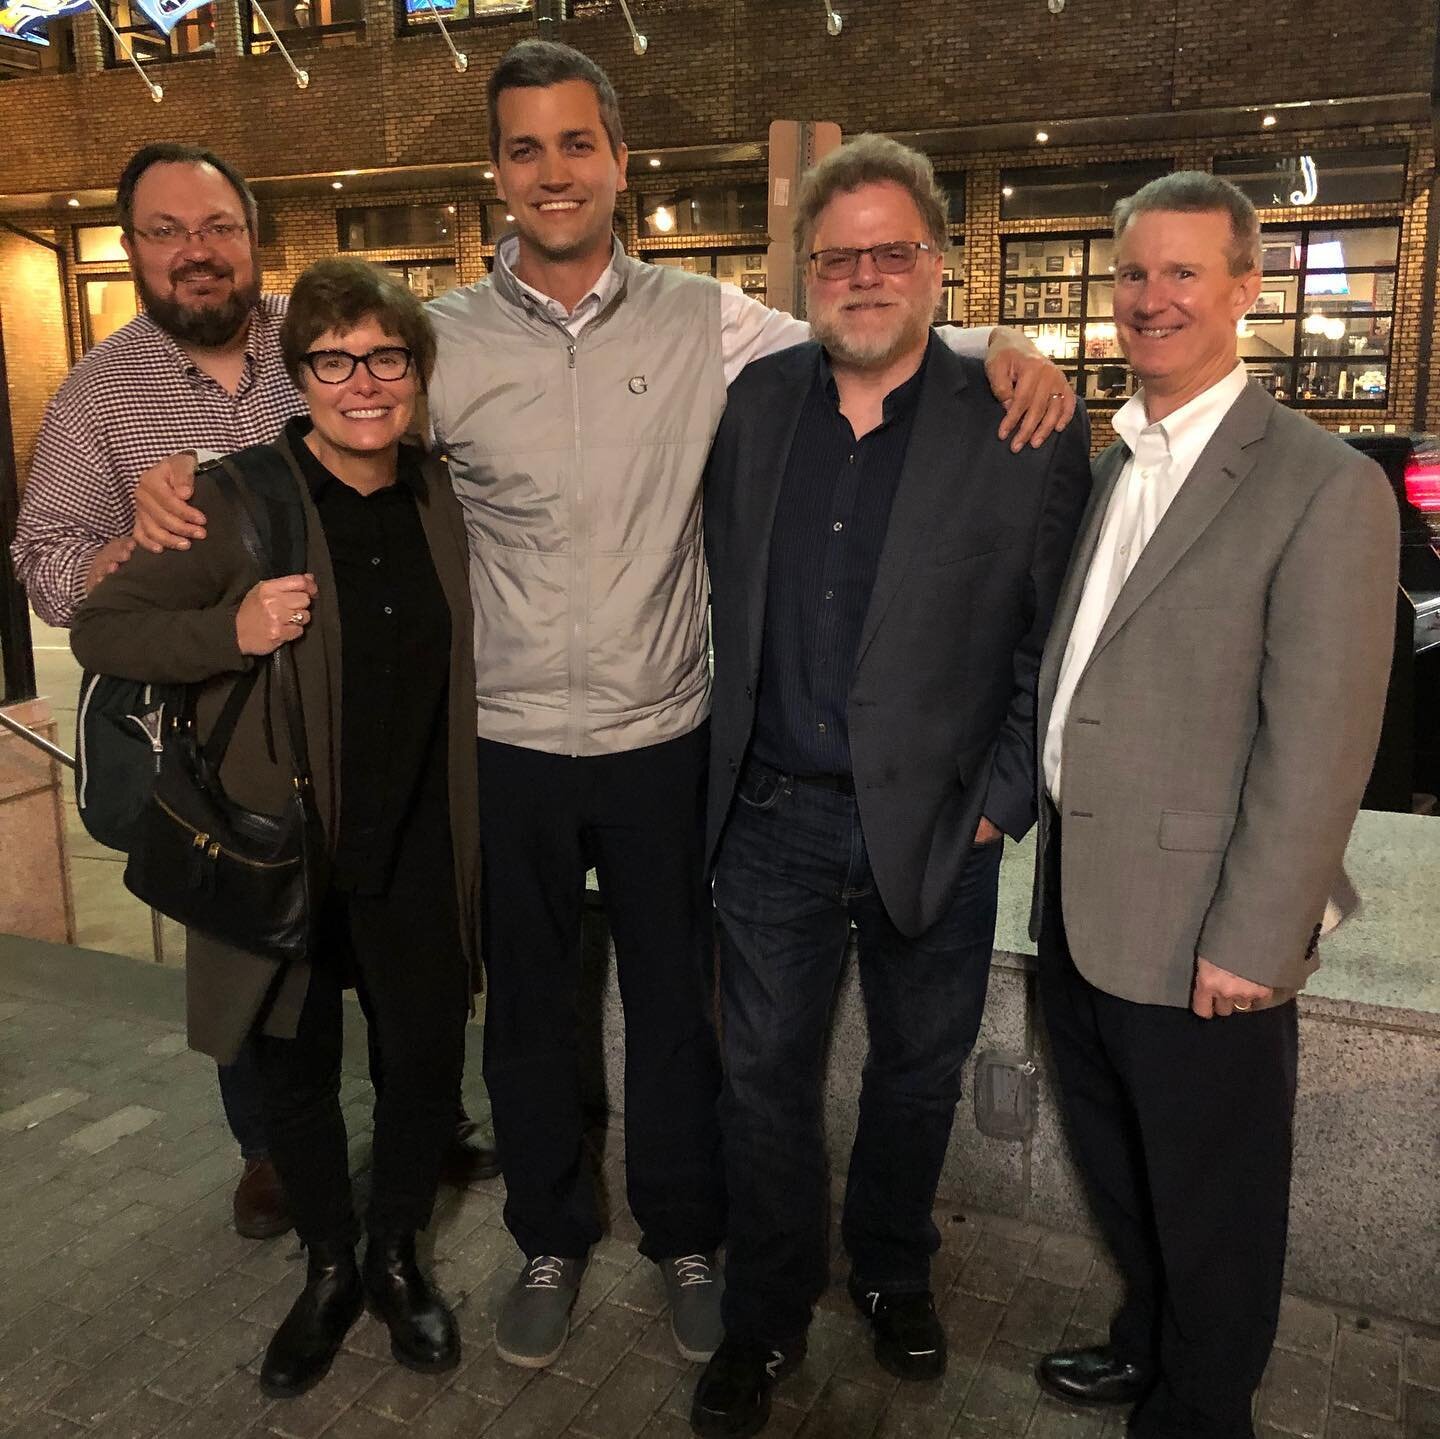 Thank you Woodford and Watco Manufacturing for a great night of team building and dinner in Nashville. A special thank you to Scott, John, Ellen, and Kevin for a great evening.